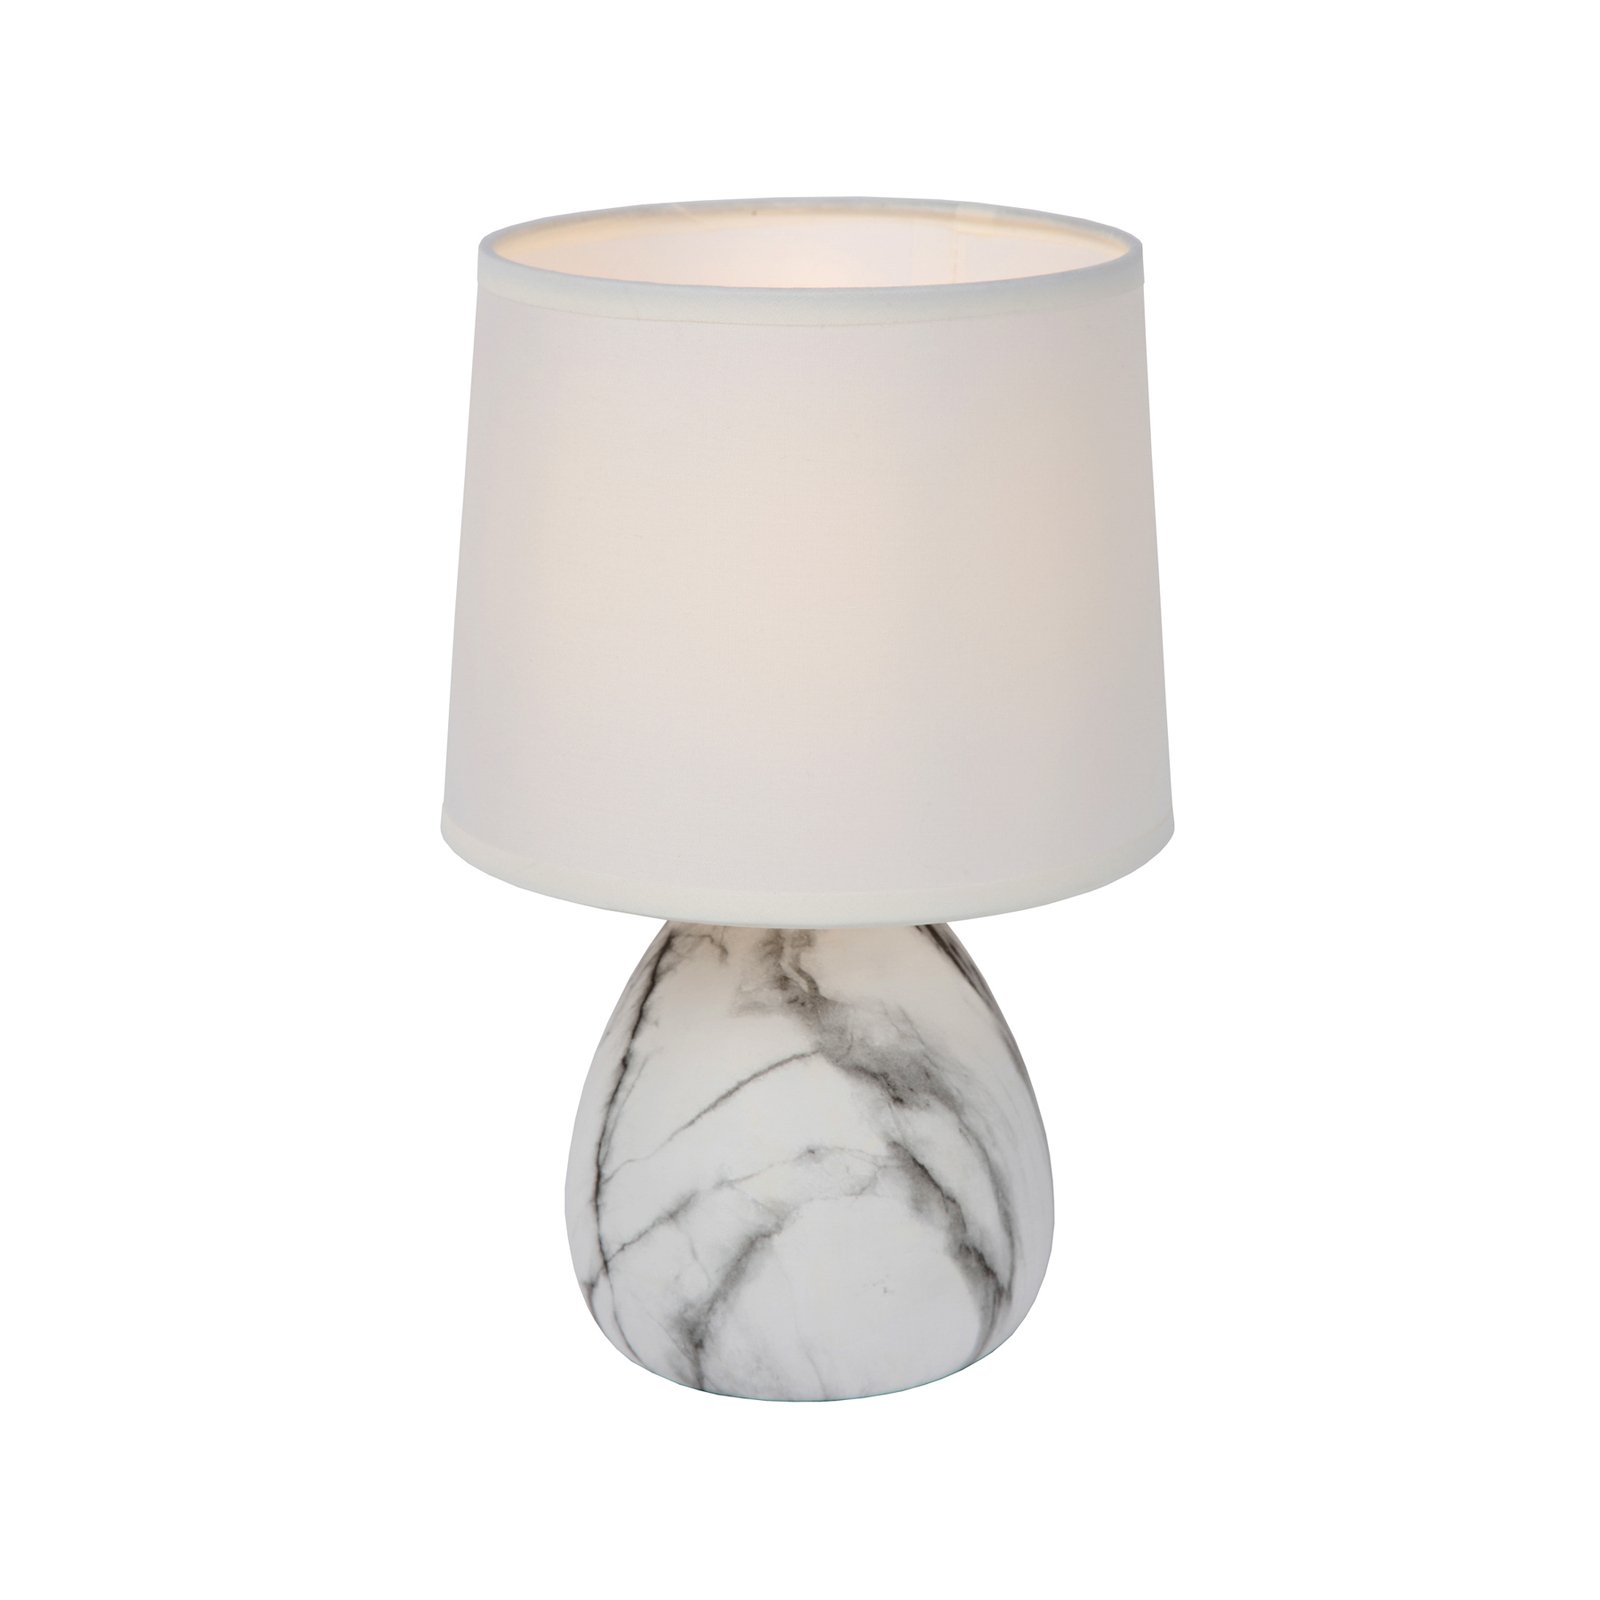 Marmo table lamp with a ceramic base, white